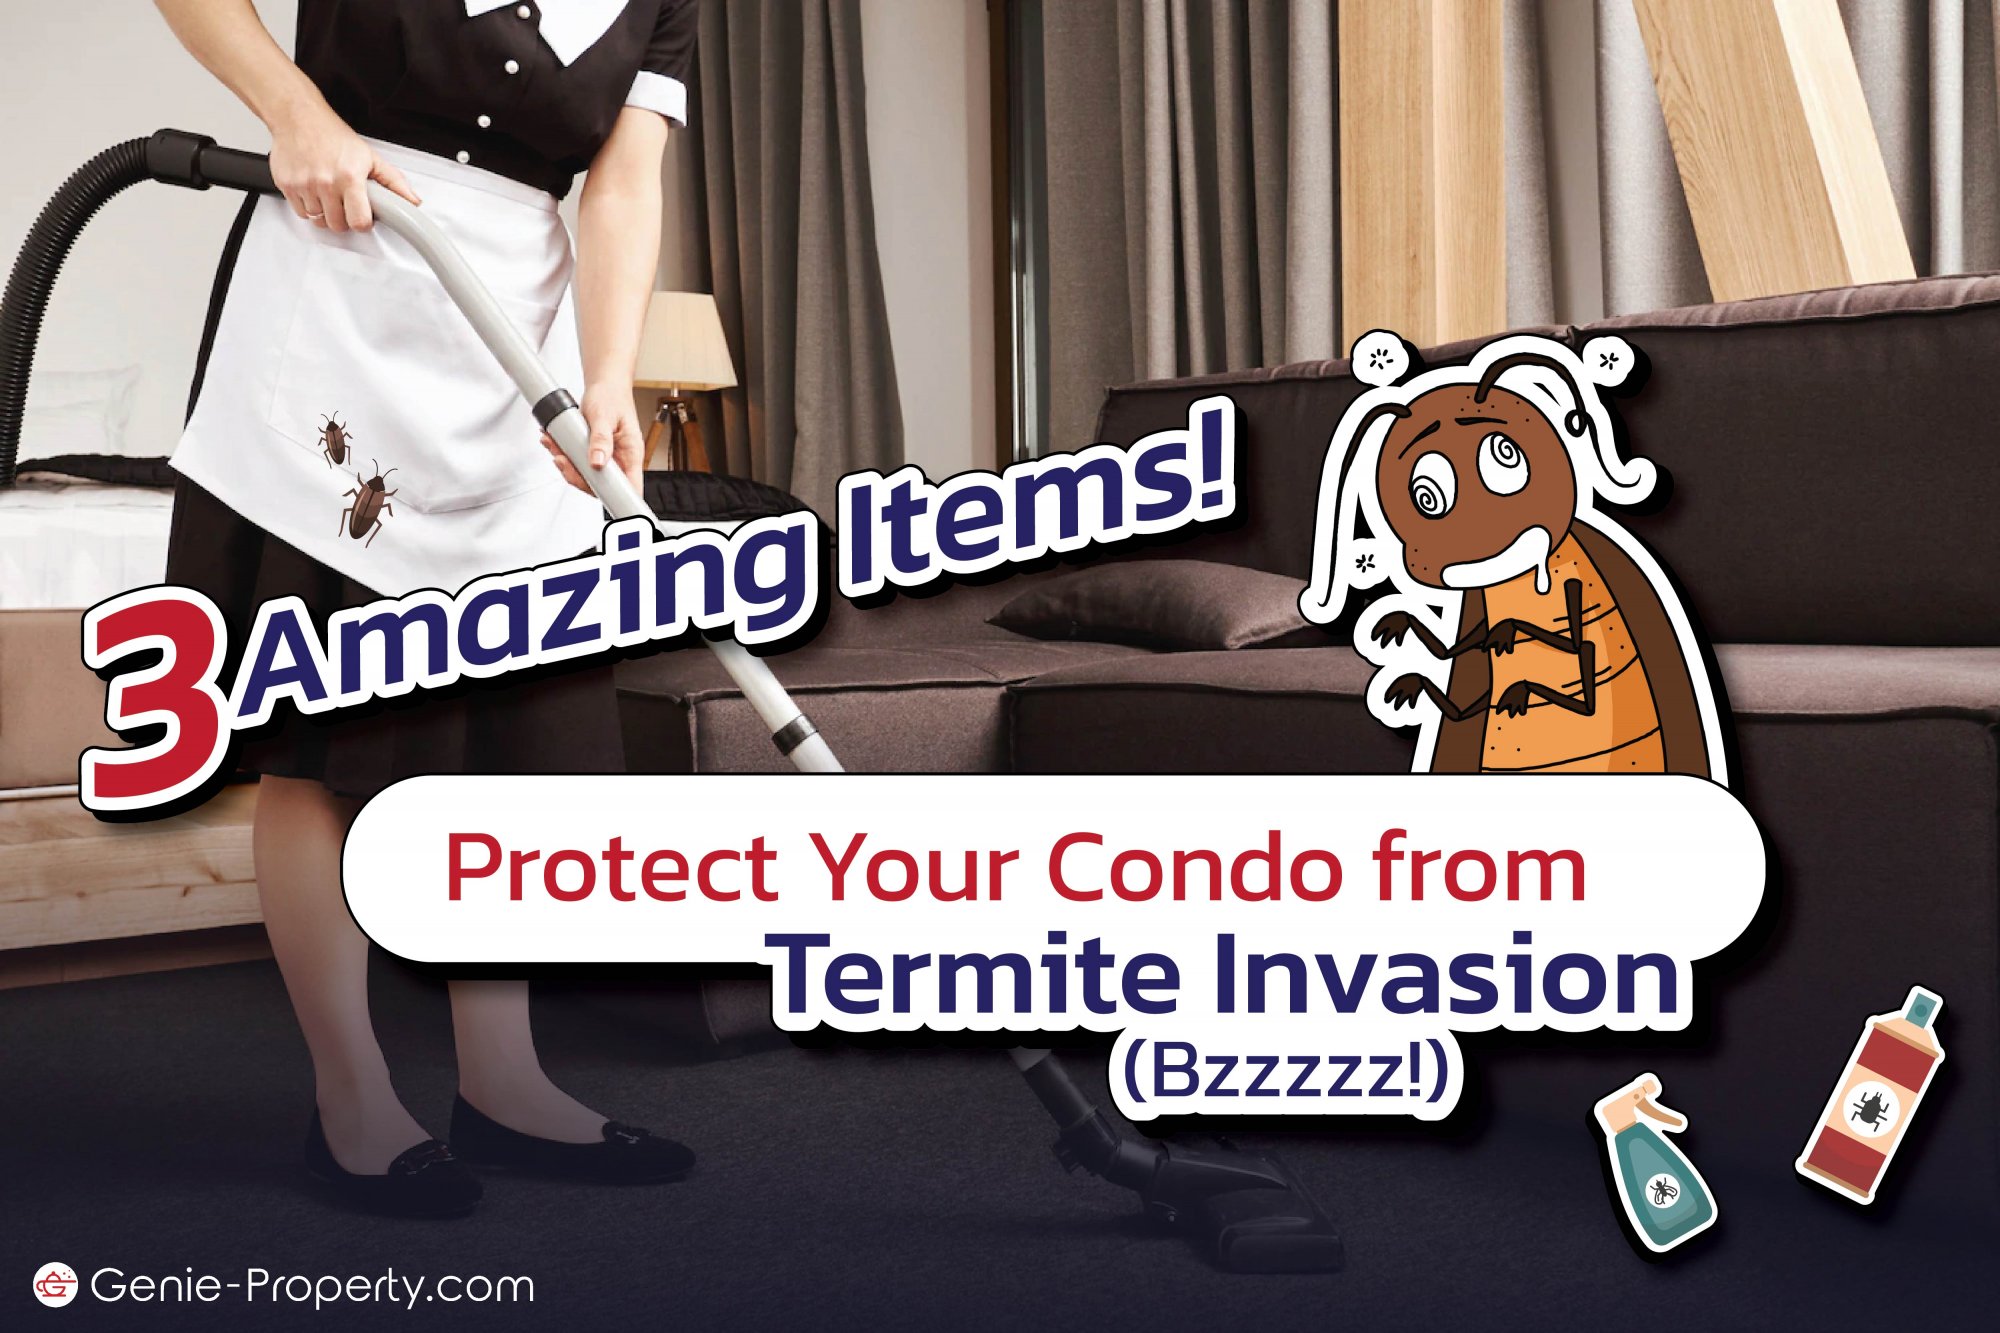 image for 3 Amazing Items! Protect Your Condo from Termite Invasion (Bzzzzz!)